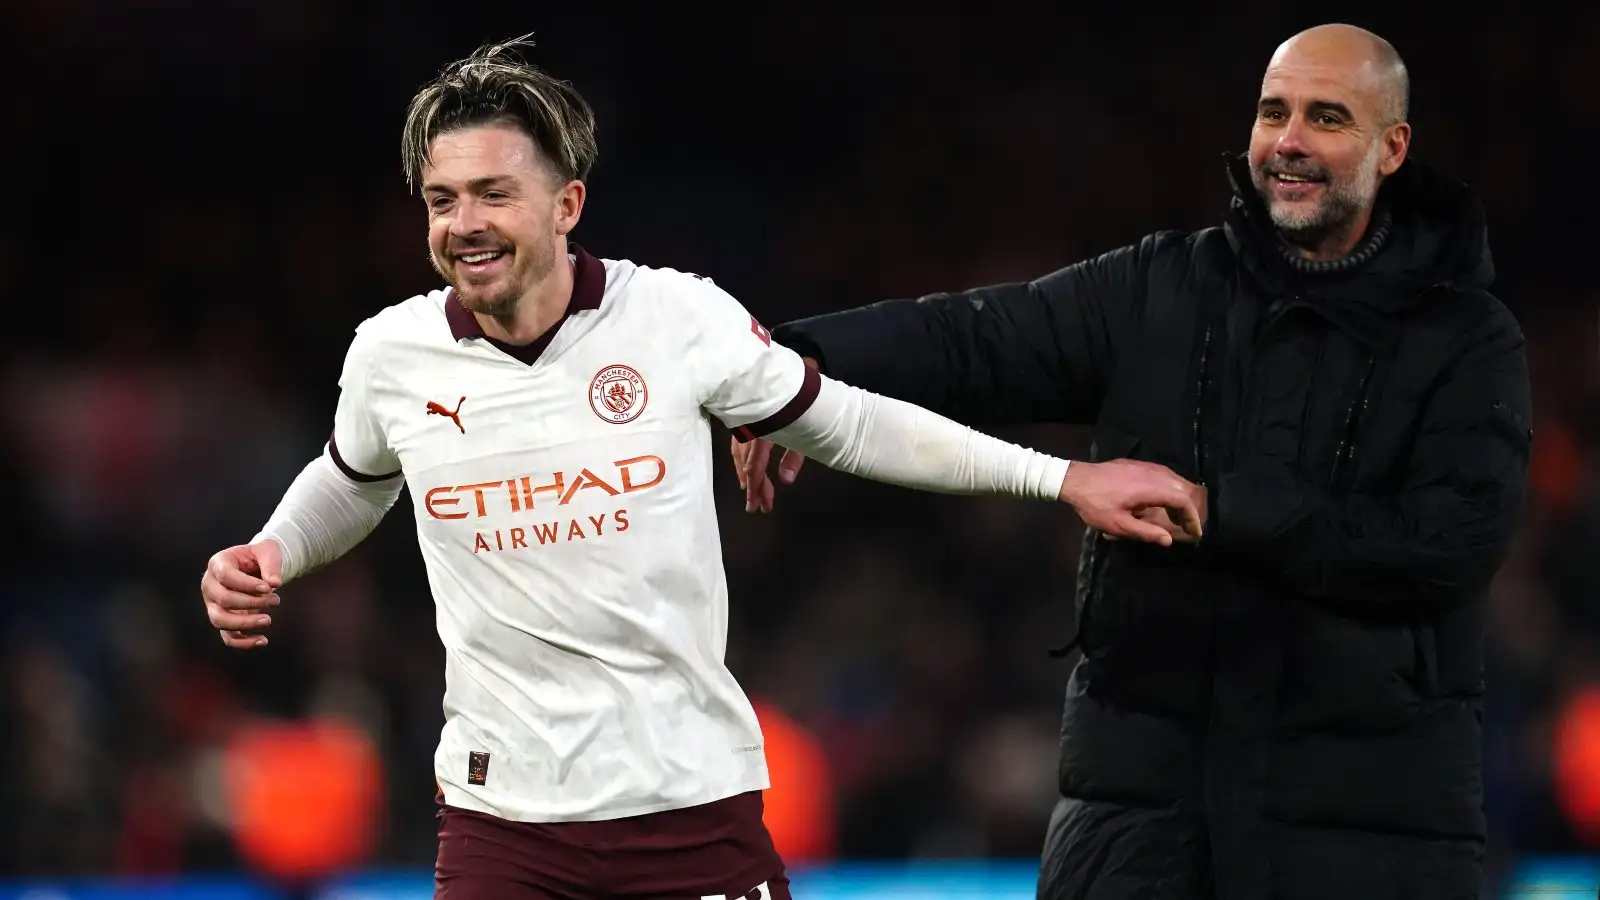 Manchester Metropolis winger Jack Grealish and Pep Guardiola after a win.